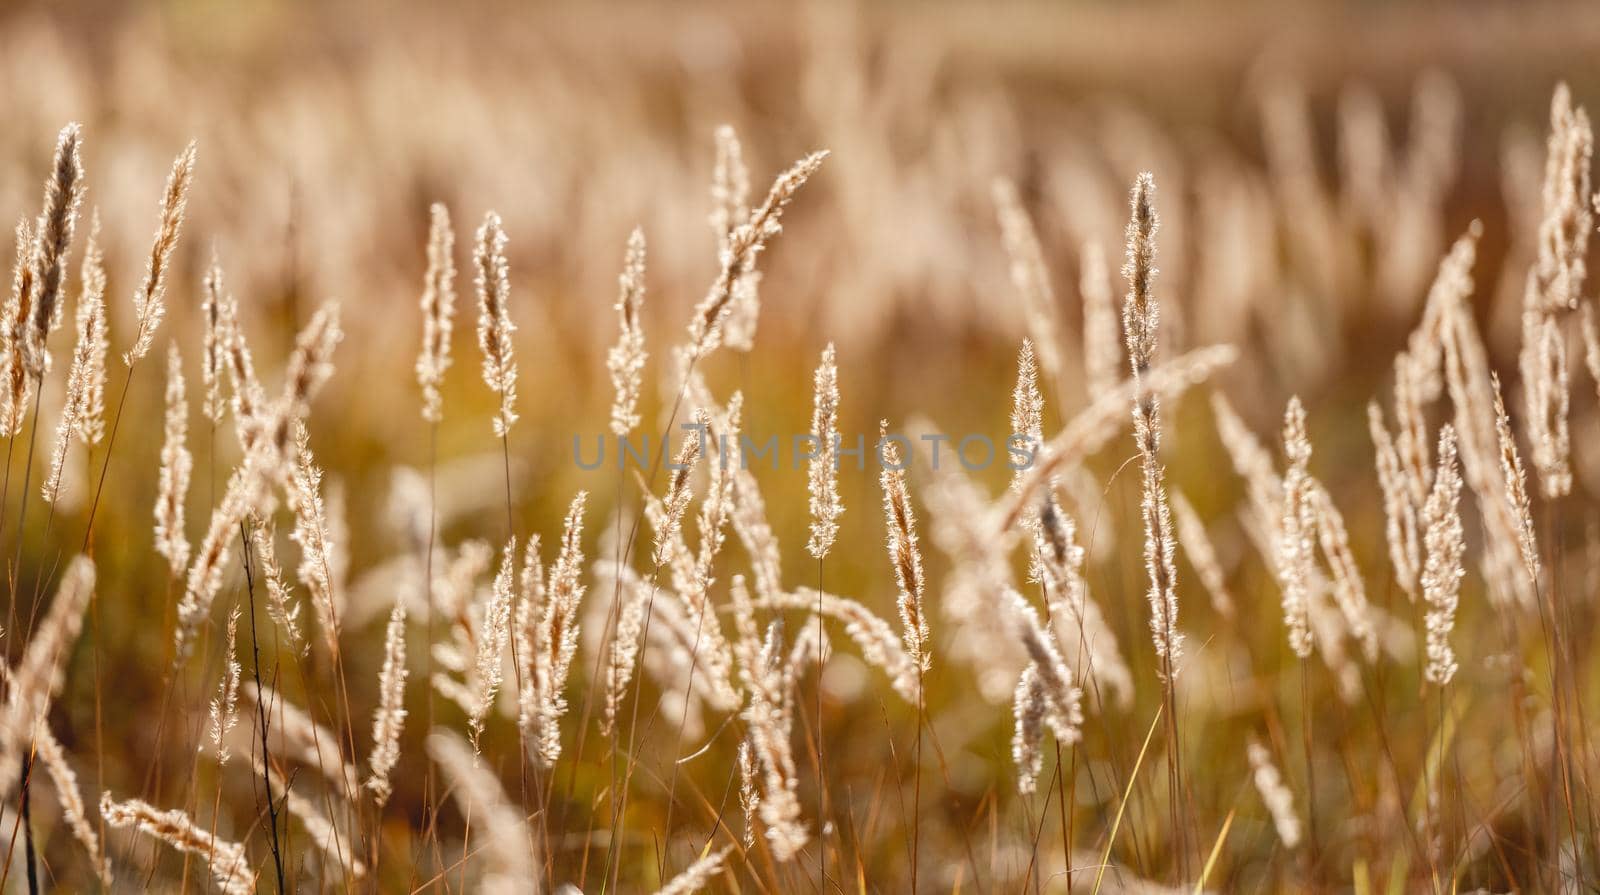 Cereal field with yellow ripe spikelets closeup with blurred background. Wheat grain in farmaland with beautiful sunlight